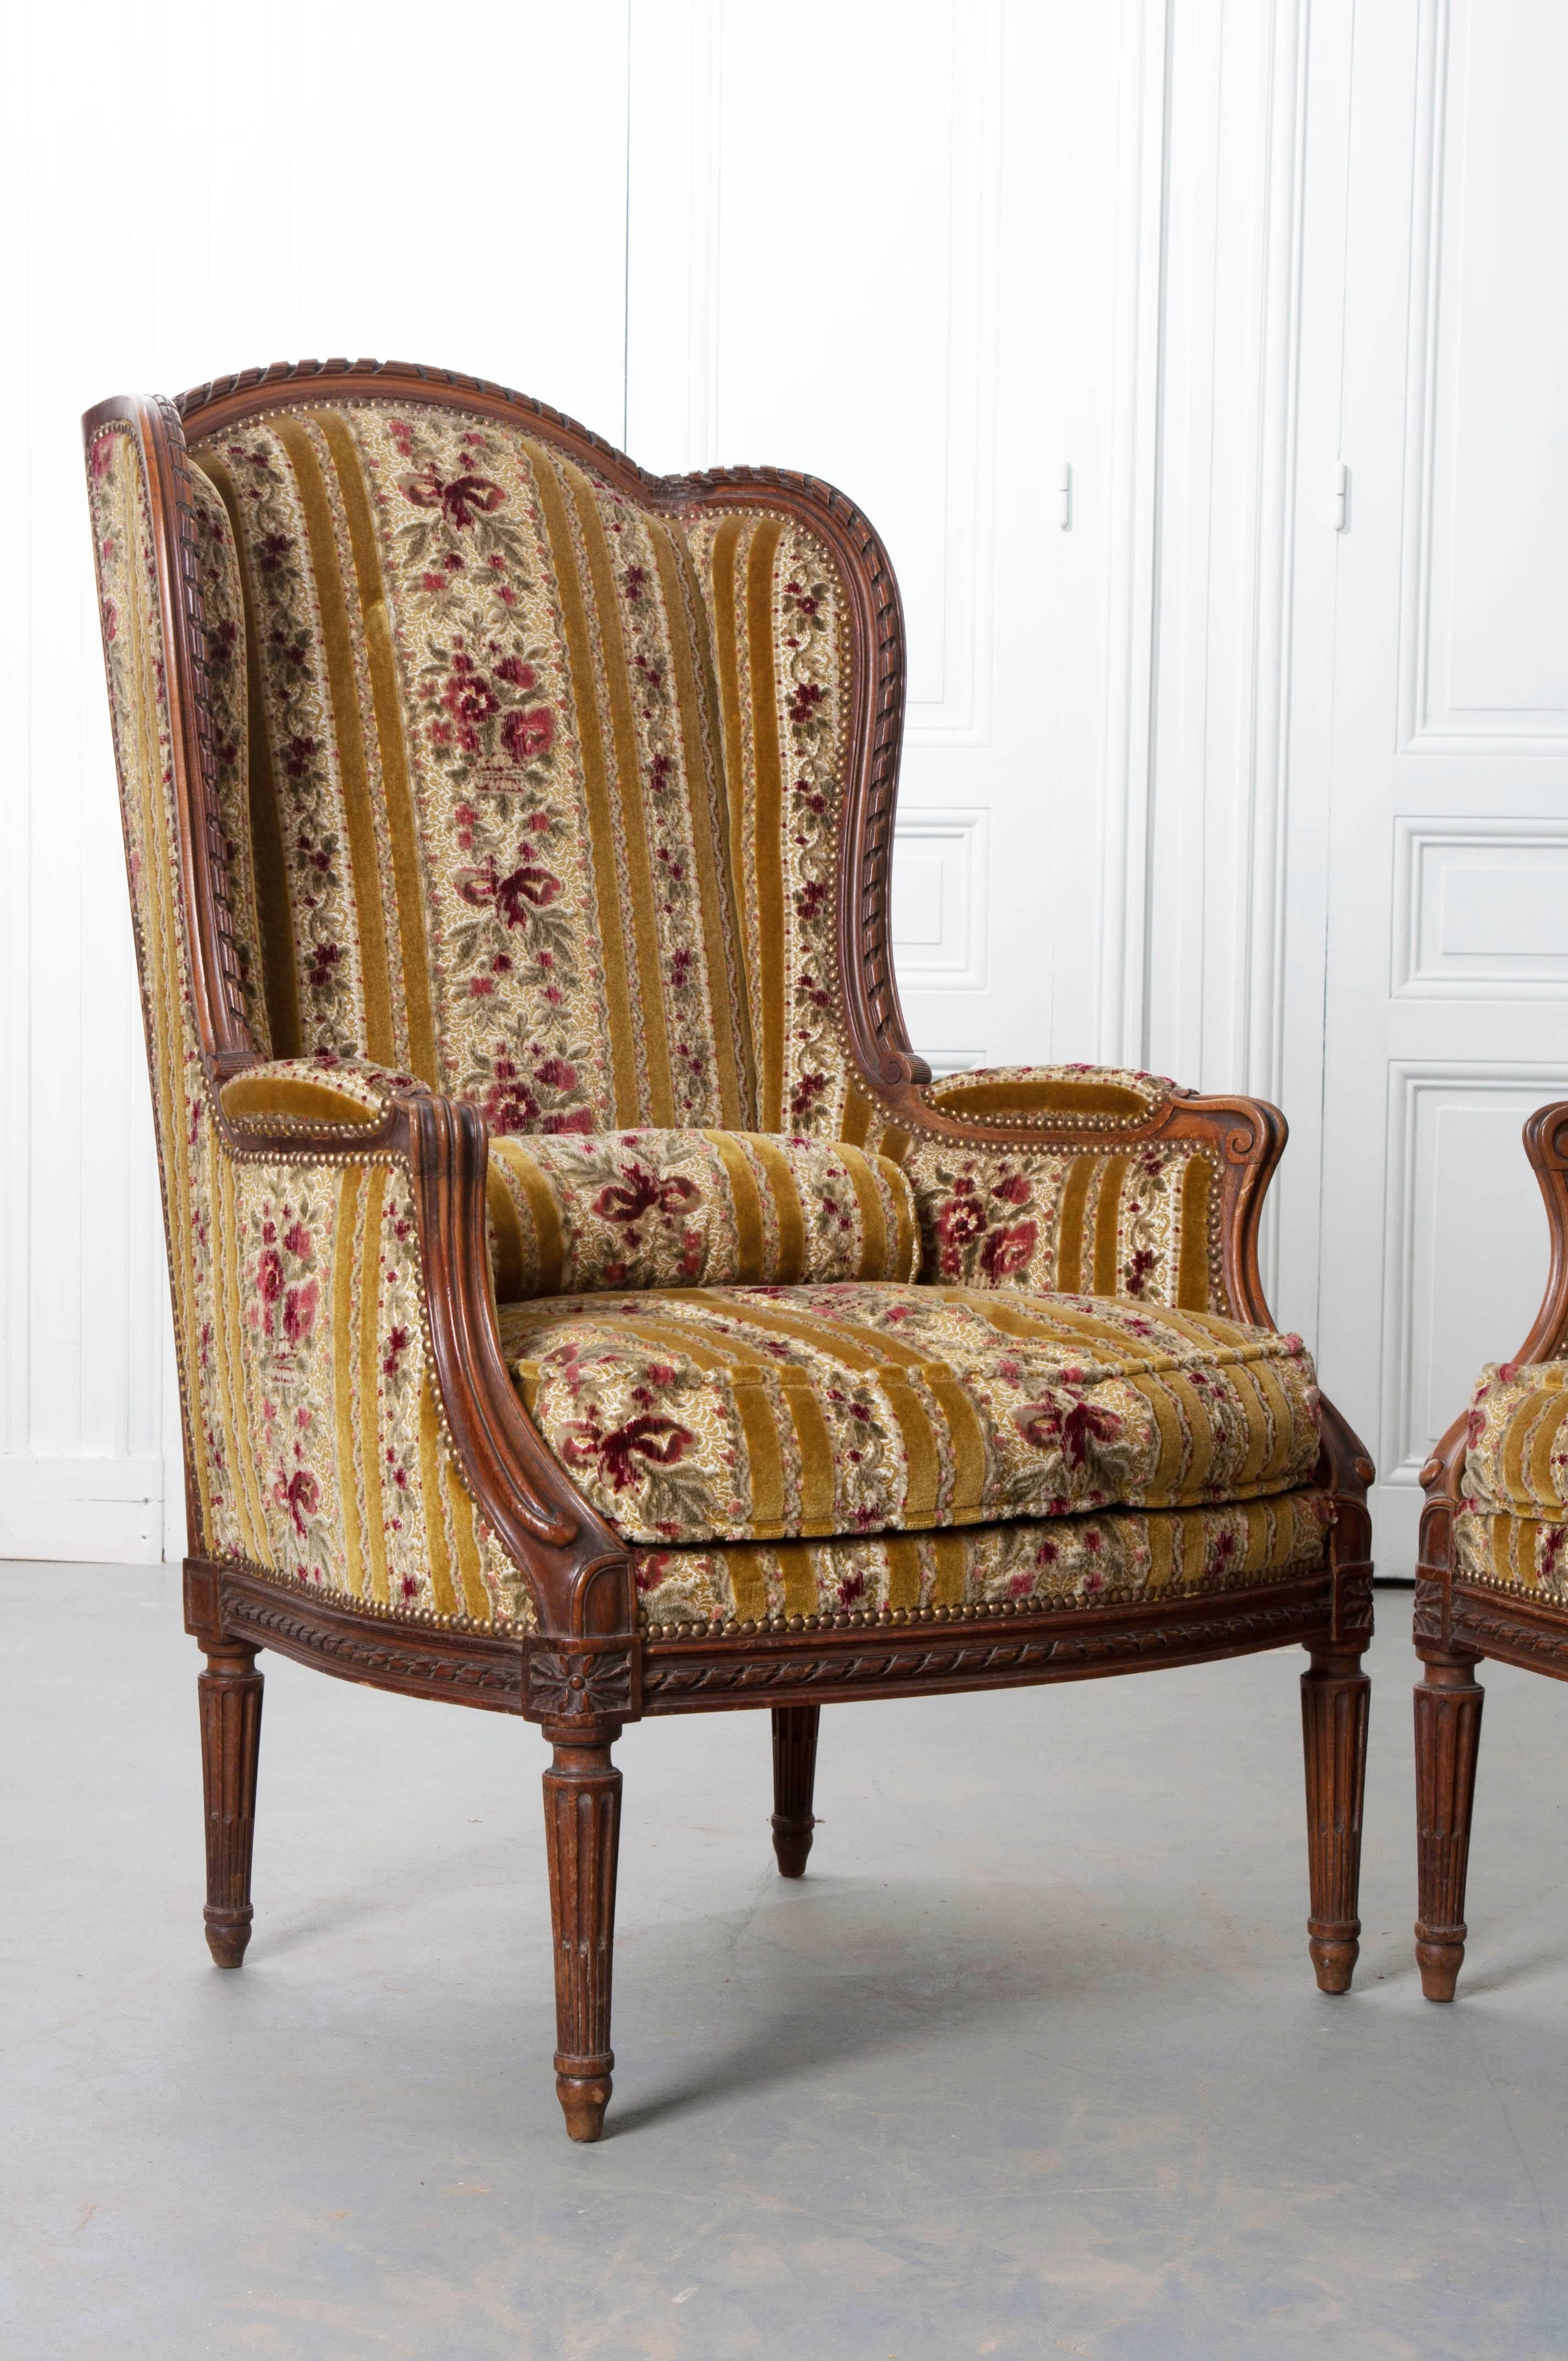 A pair of brilliantly carved French walnut bergères that combine elements of Louis XV and XVI styles. The back features a twisted ribbon motif that can also be found on the chairs' rails. The arms have a more fluid, scrolled design, influenced by